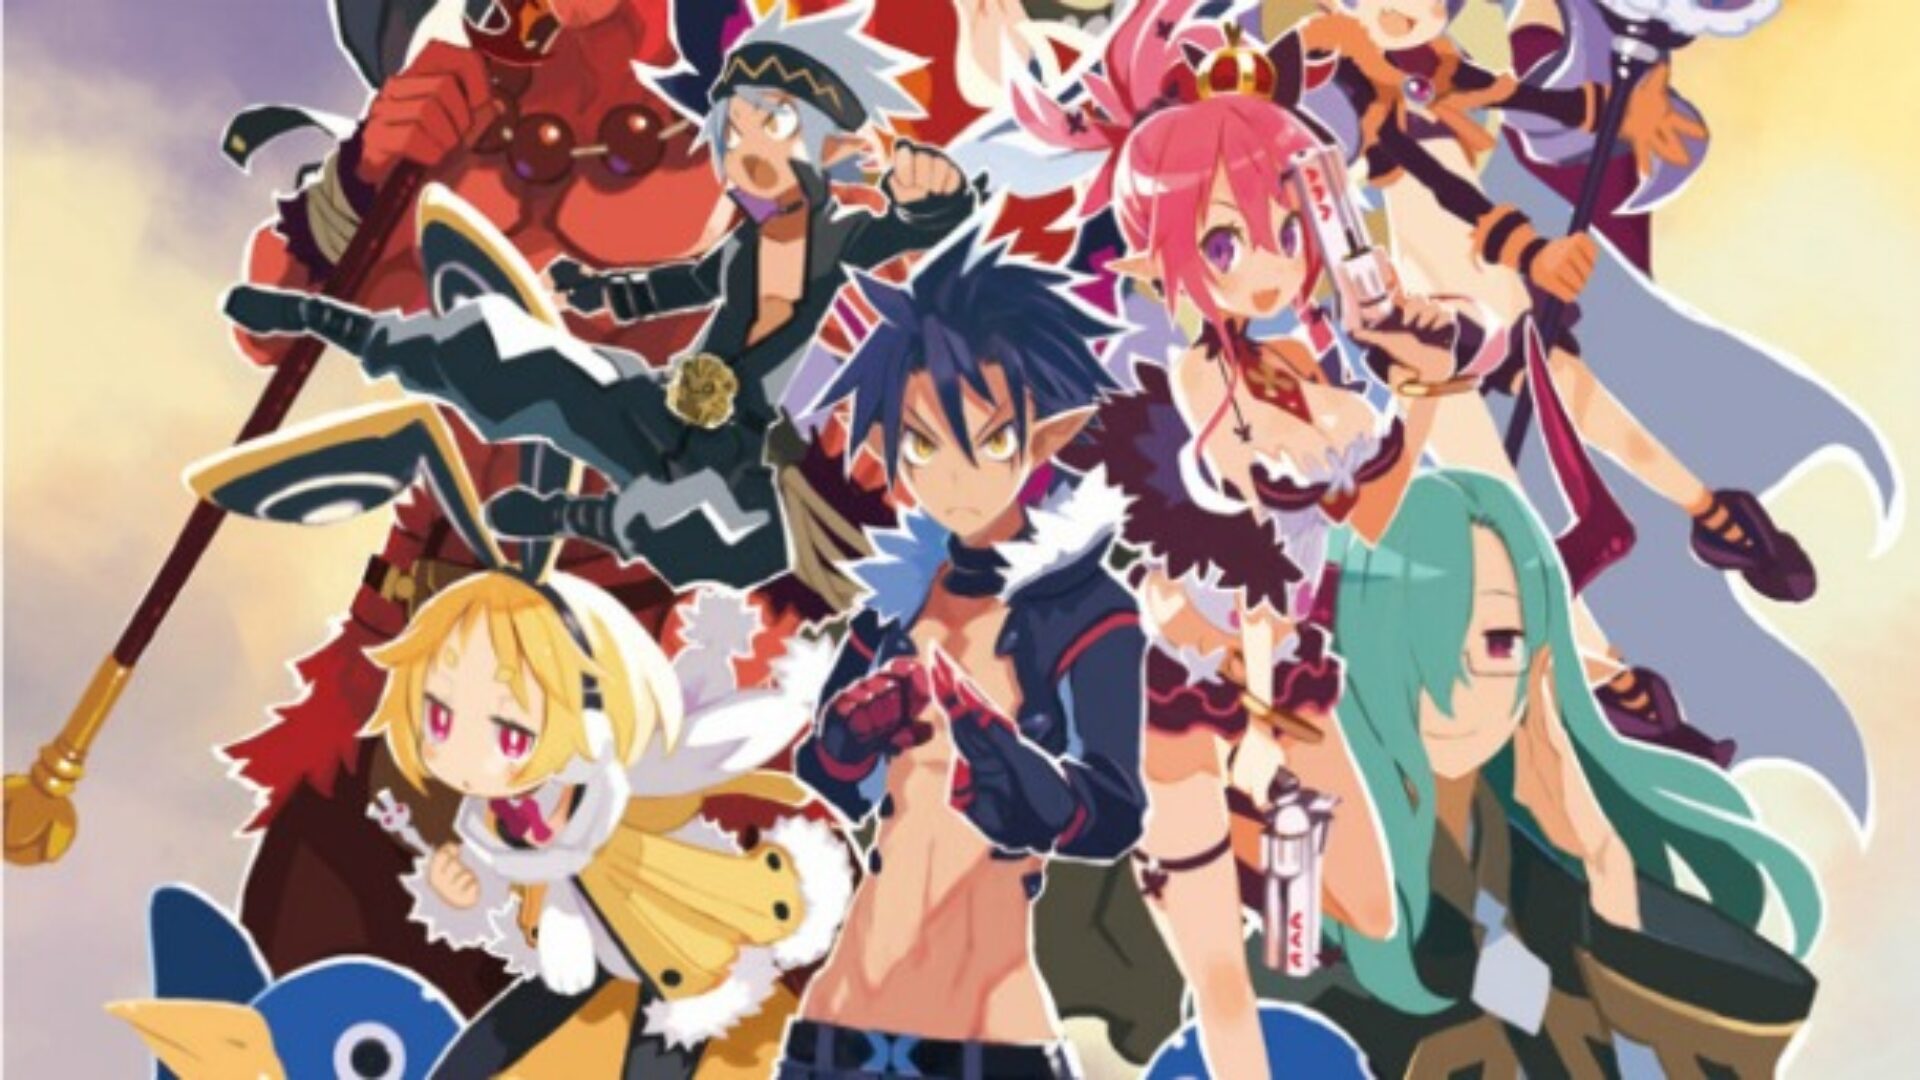 Disgaea 5: Alliance of Vengeance Hands-On Preview